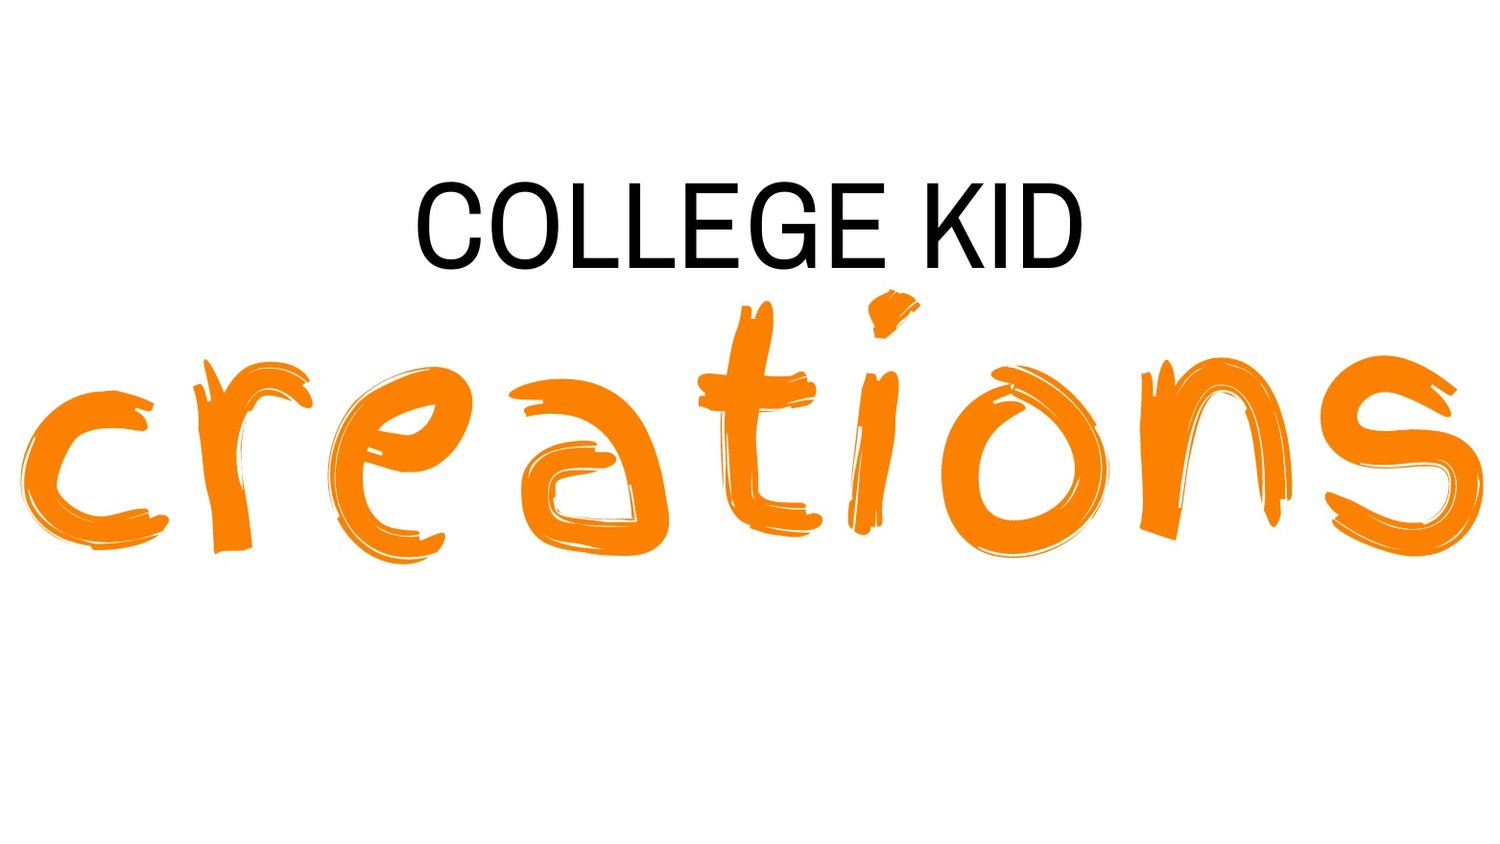 College Kid Creations